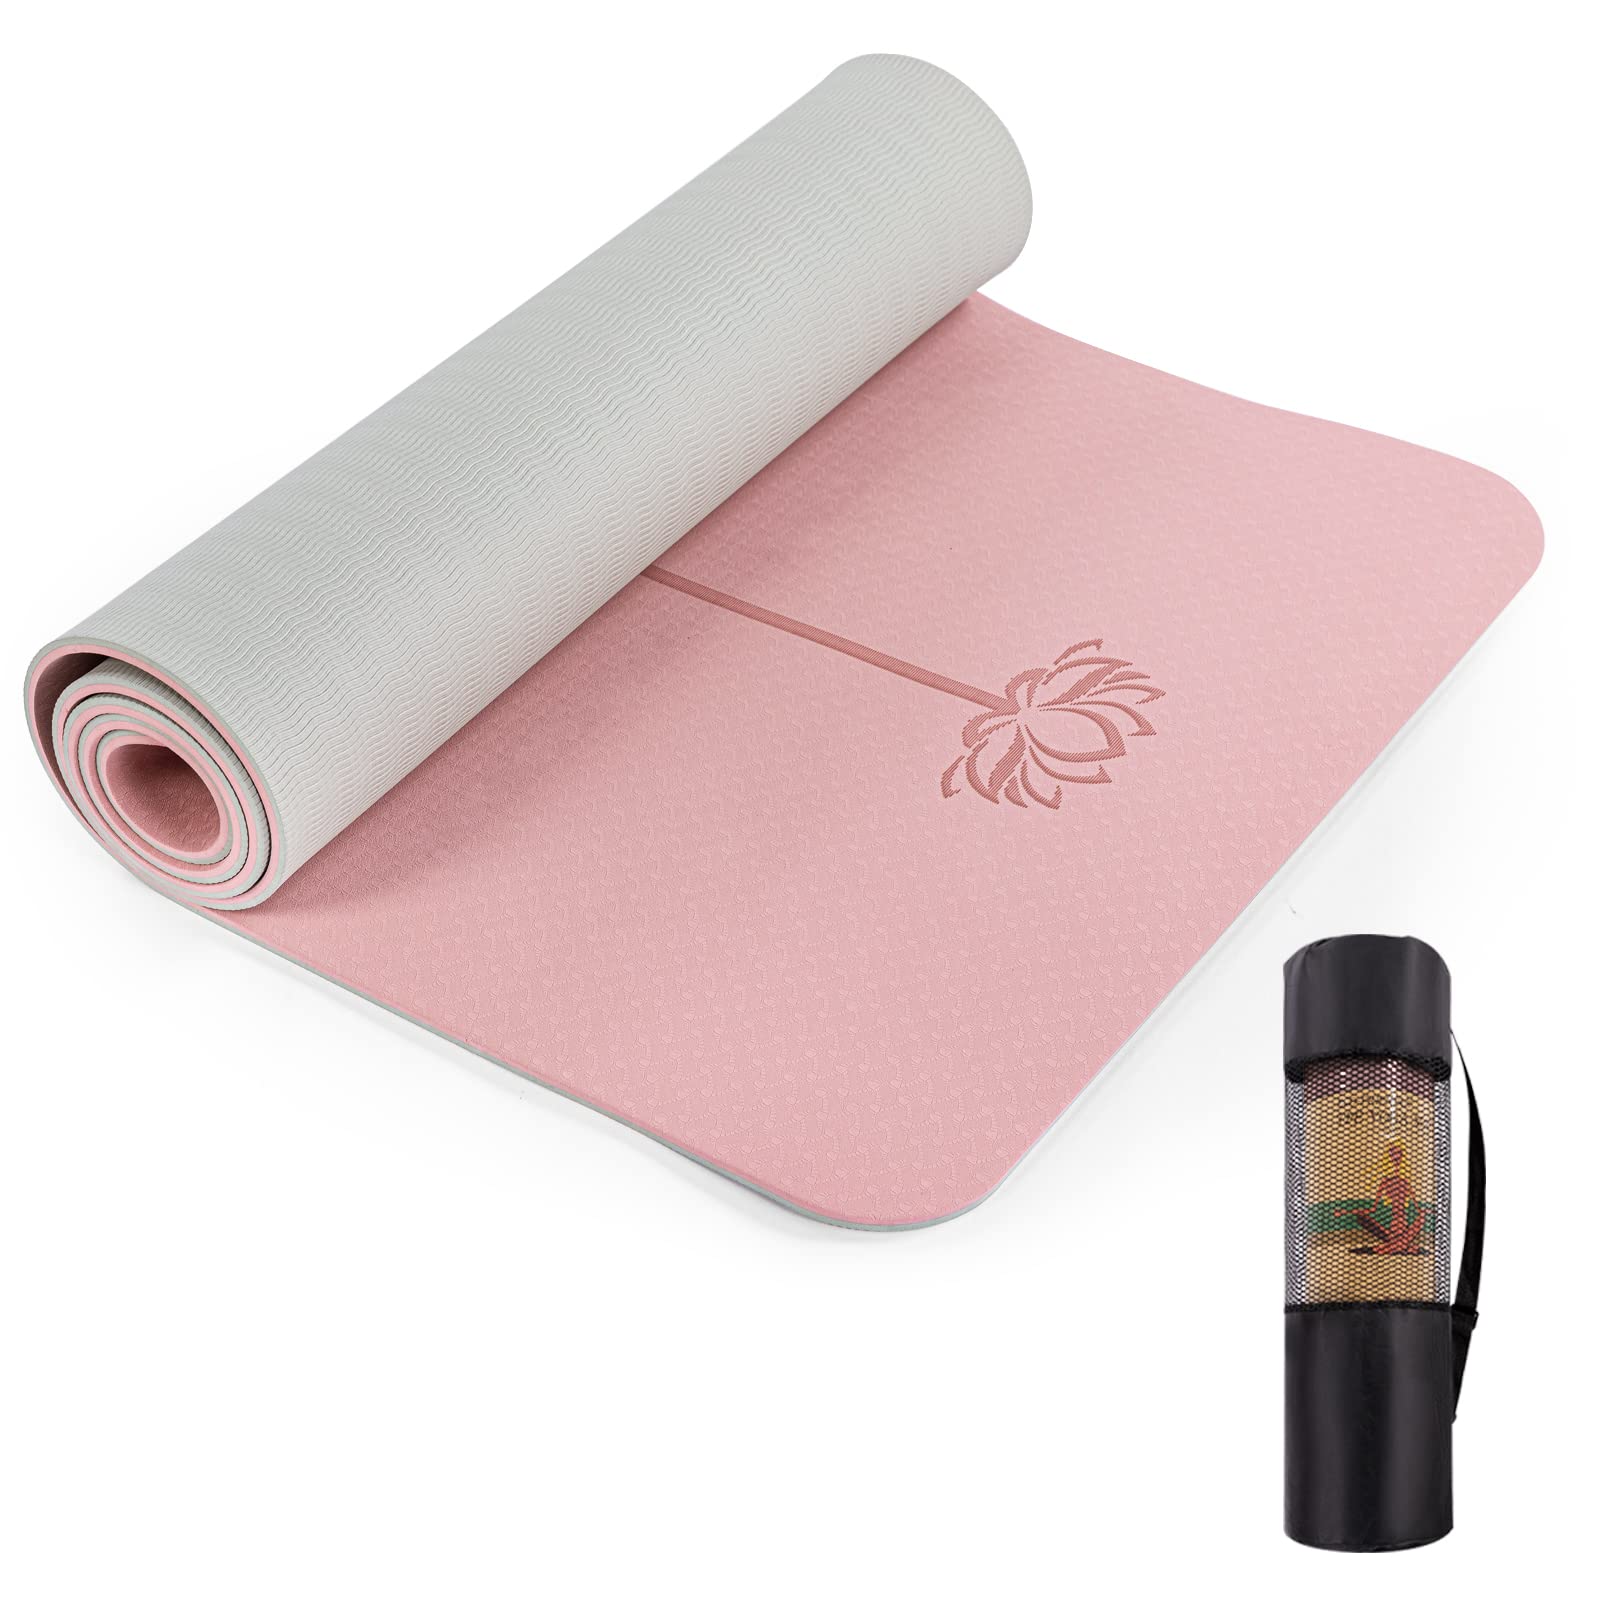  UMINEUX Yoga Mat Extra Thick 1/3 Non Slip Yoga Mats For  Women Eco Friendly TPE Fitness Exercise Mat